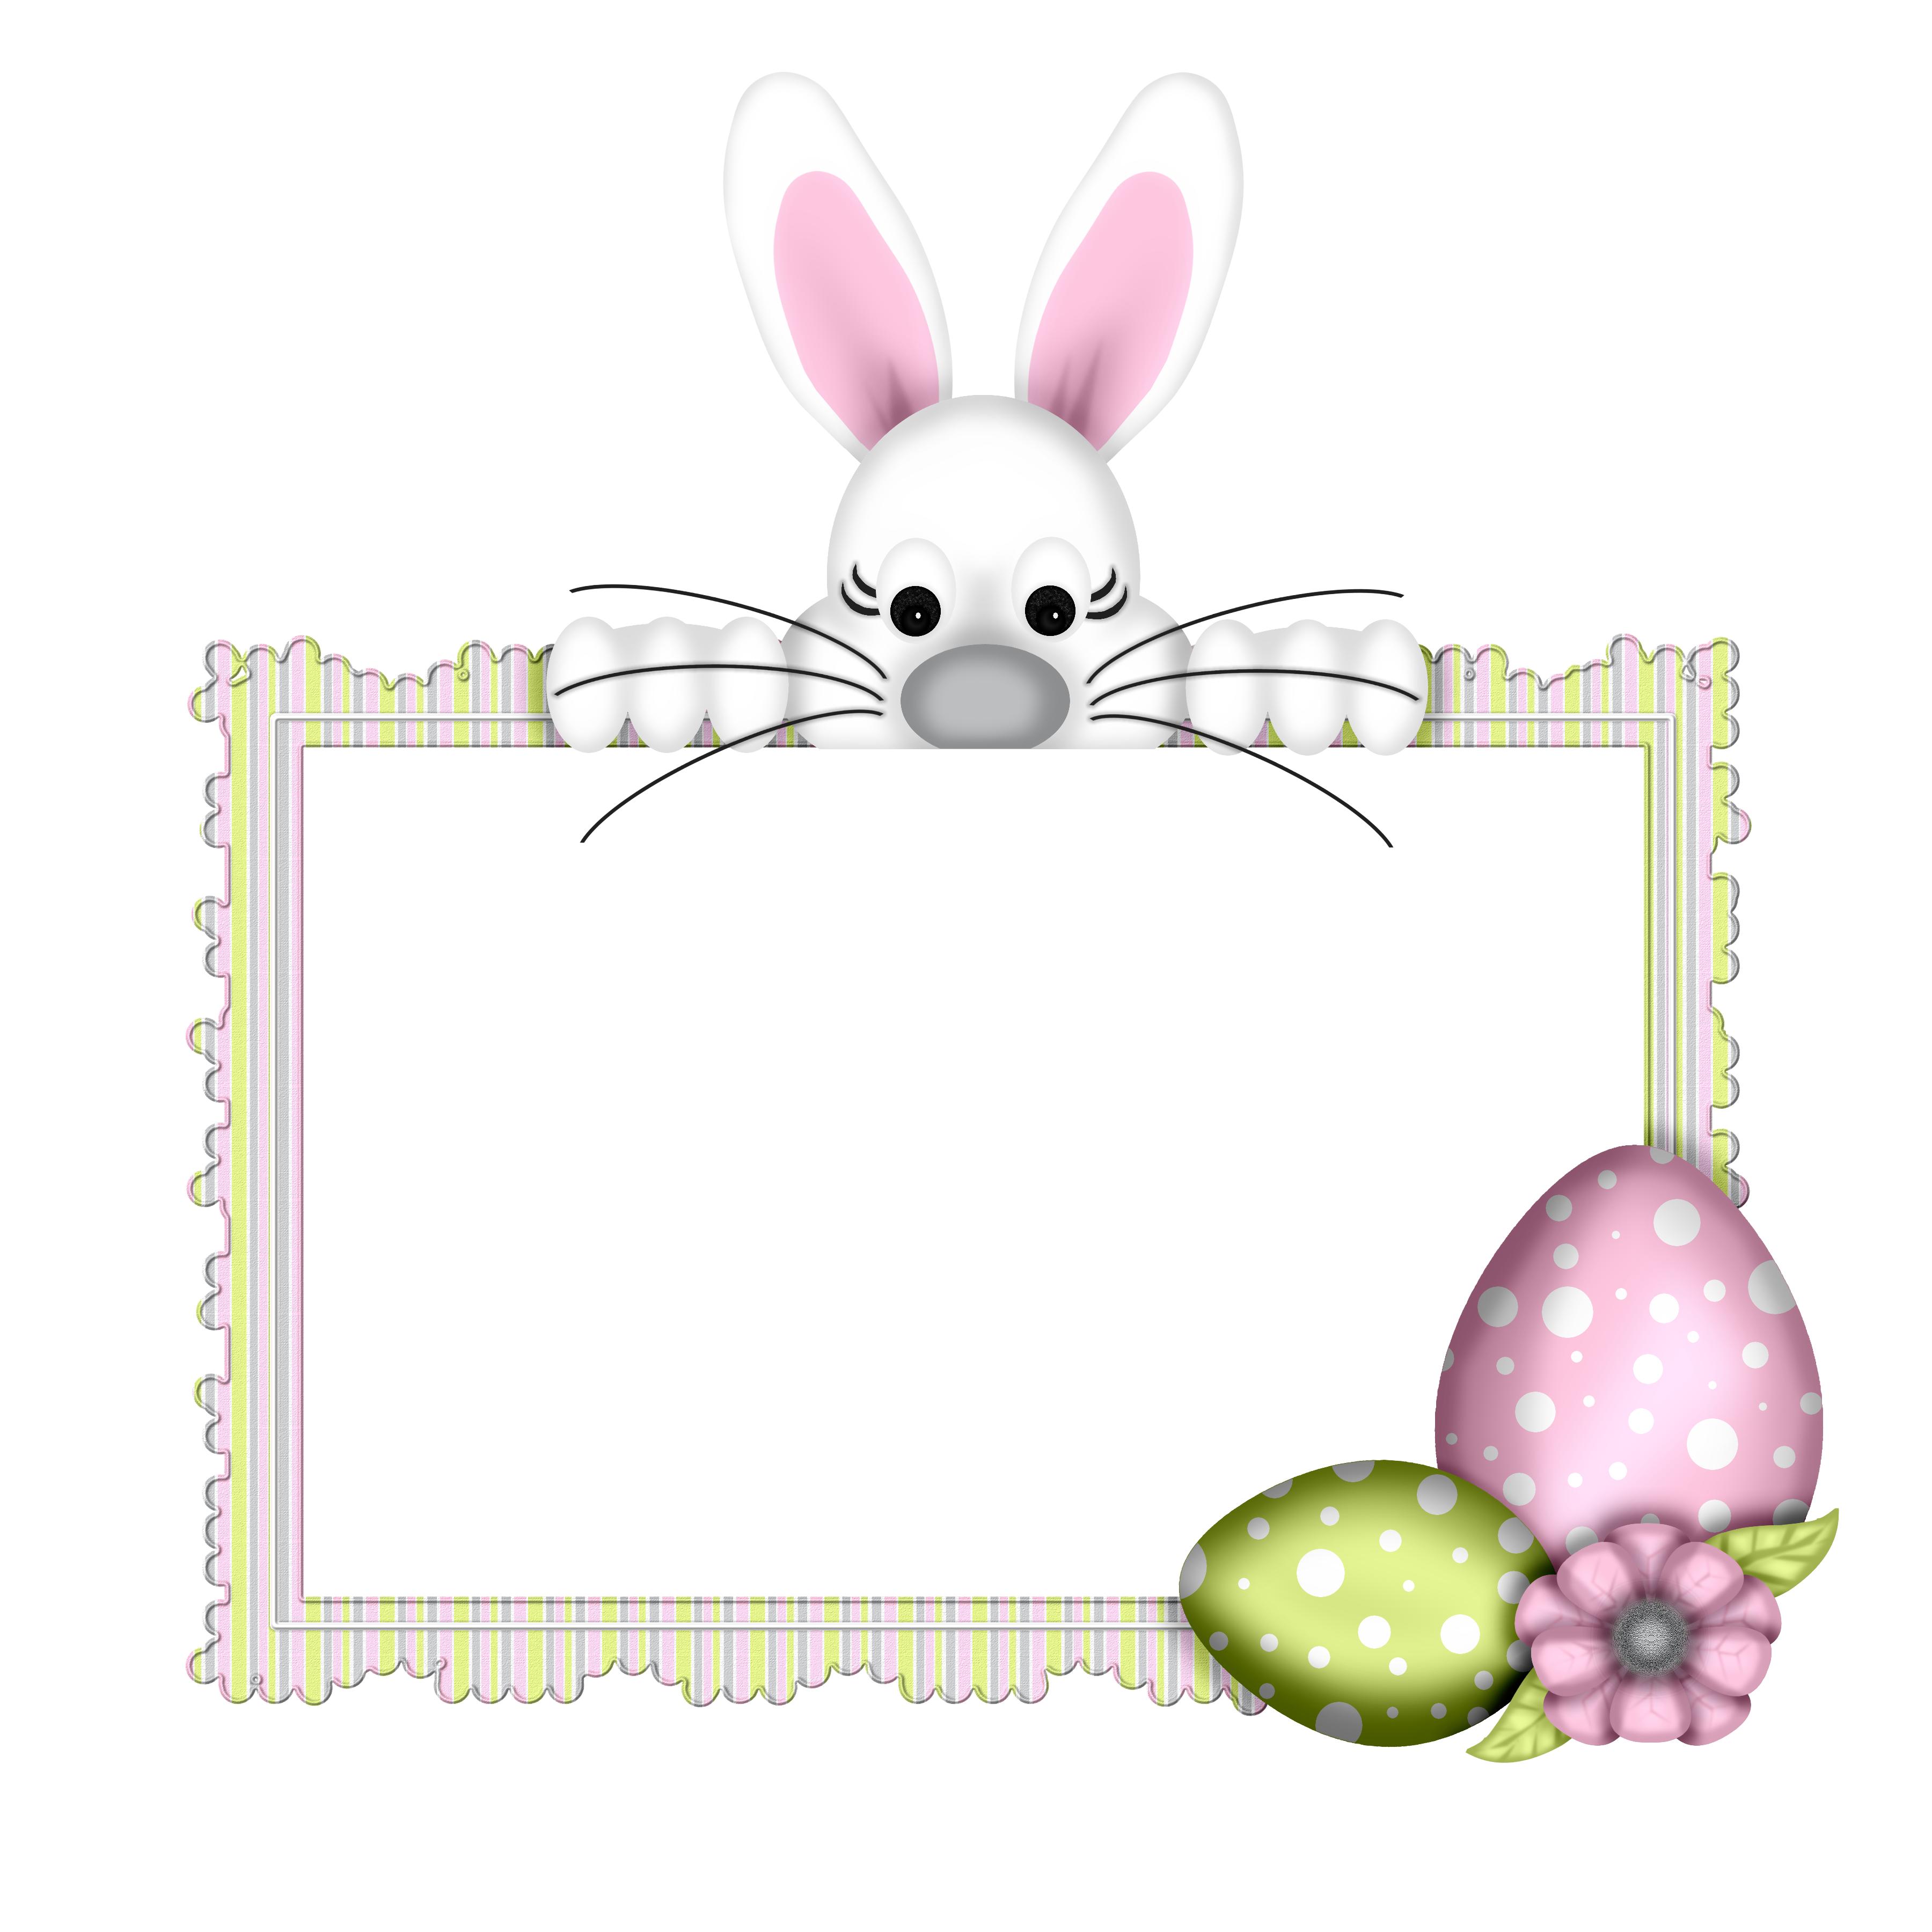 Bunny Egg Tabbies Hare Easter PNG